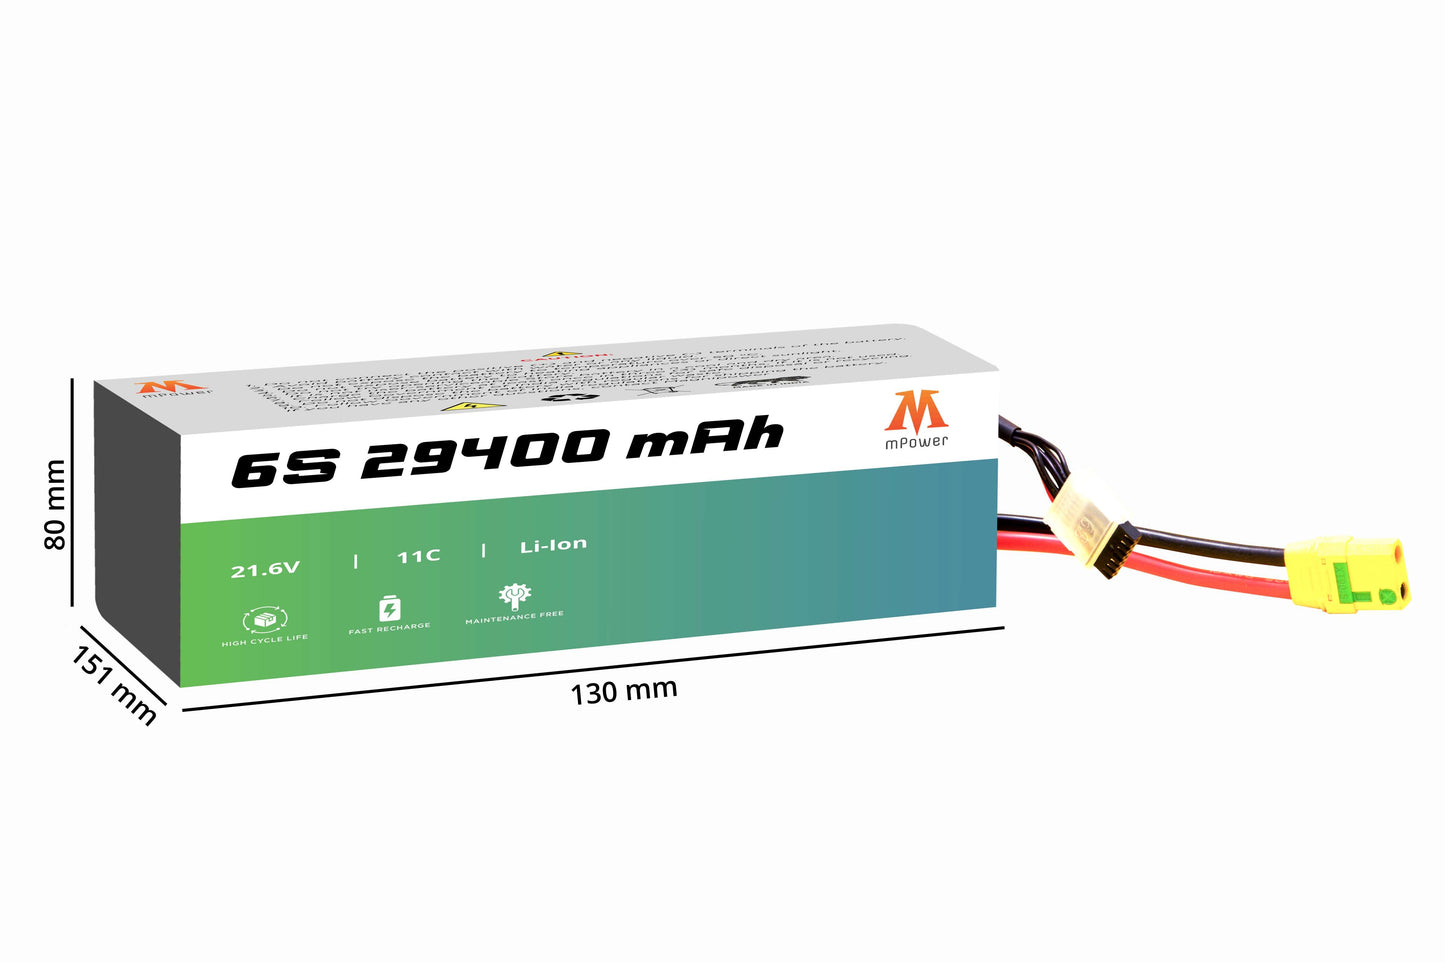 mPower 6S 29400mAh Lithium-Ion Battery for Agricultural Spraying Drones